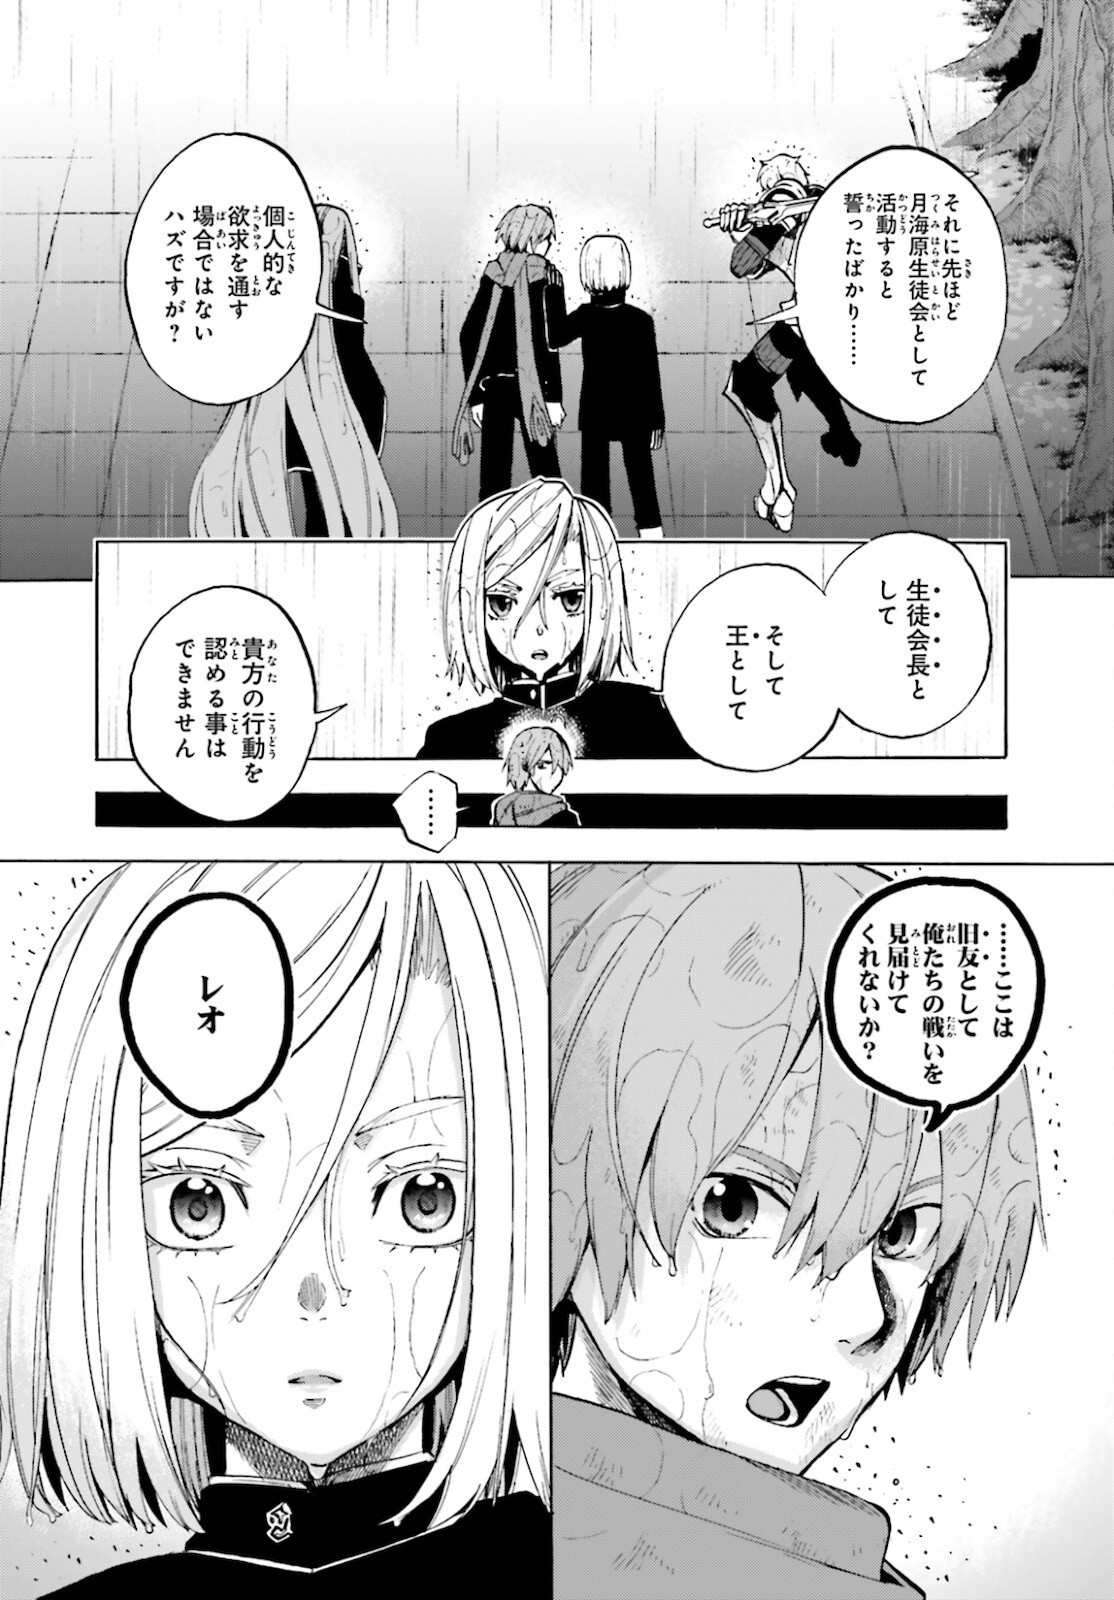 Fate/Extra CCC Fox Tail - Chapter 69.5 - Page 4